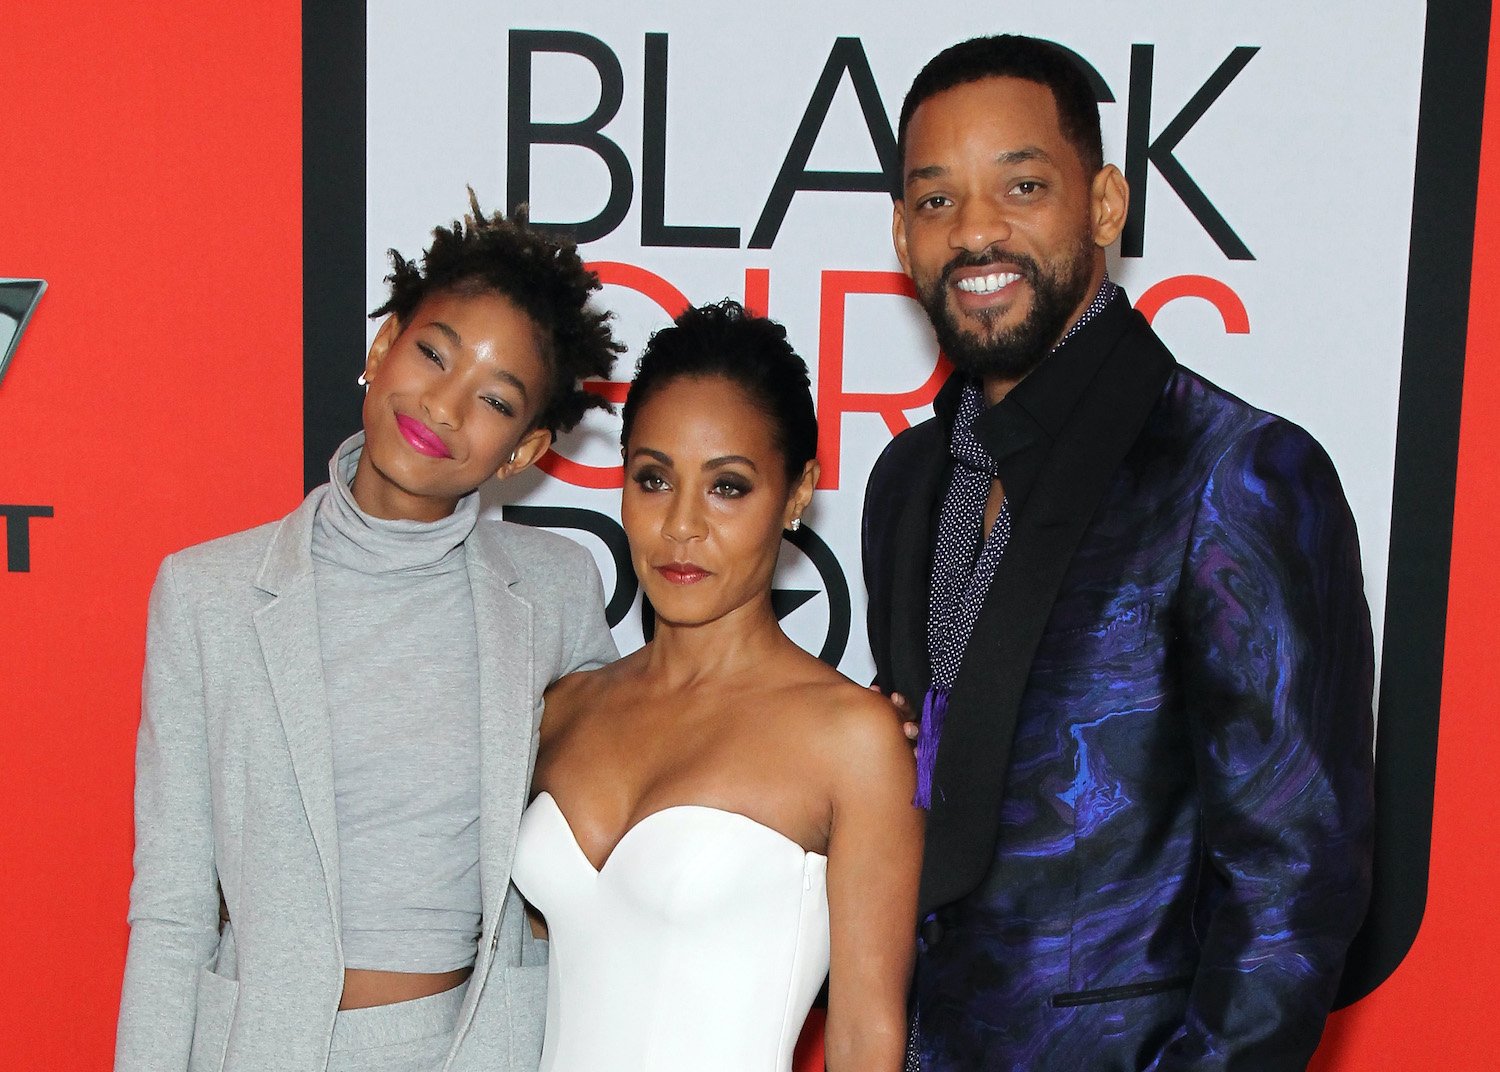 Willow Smith, Jada Pinkett Smith, and Will Smith attend the BET's Black Girls Rock!